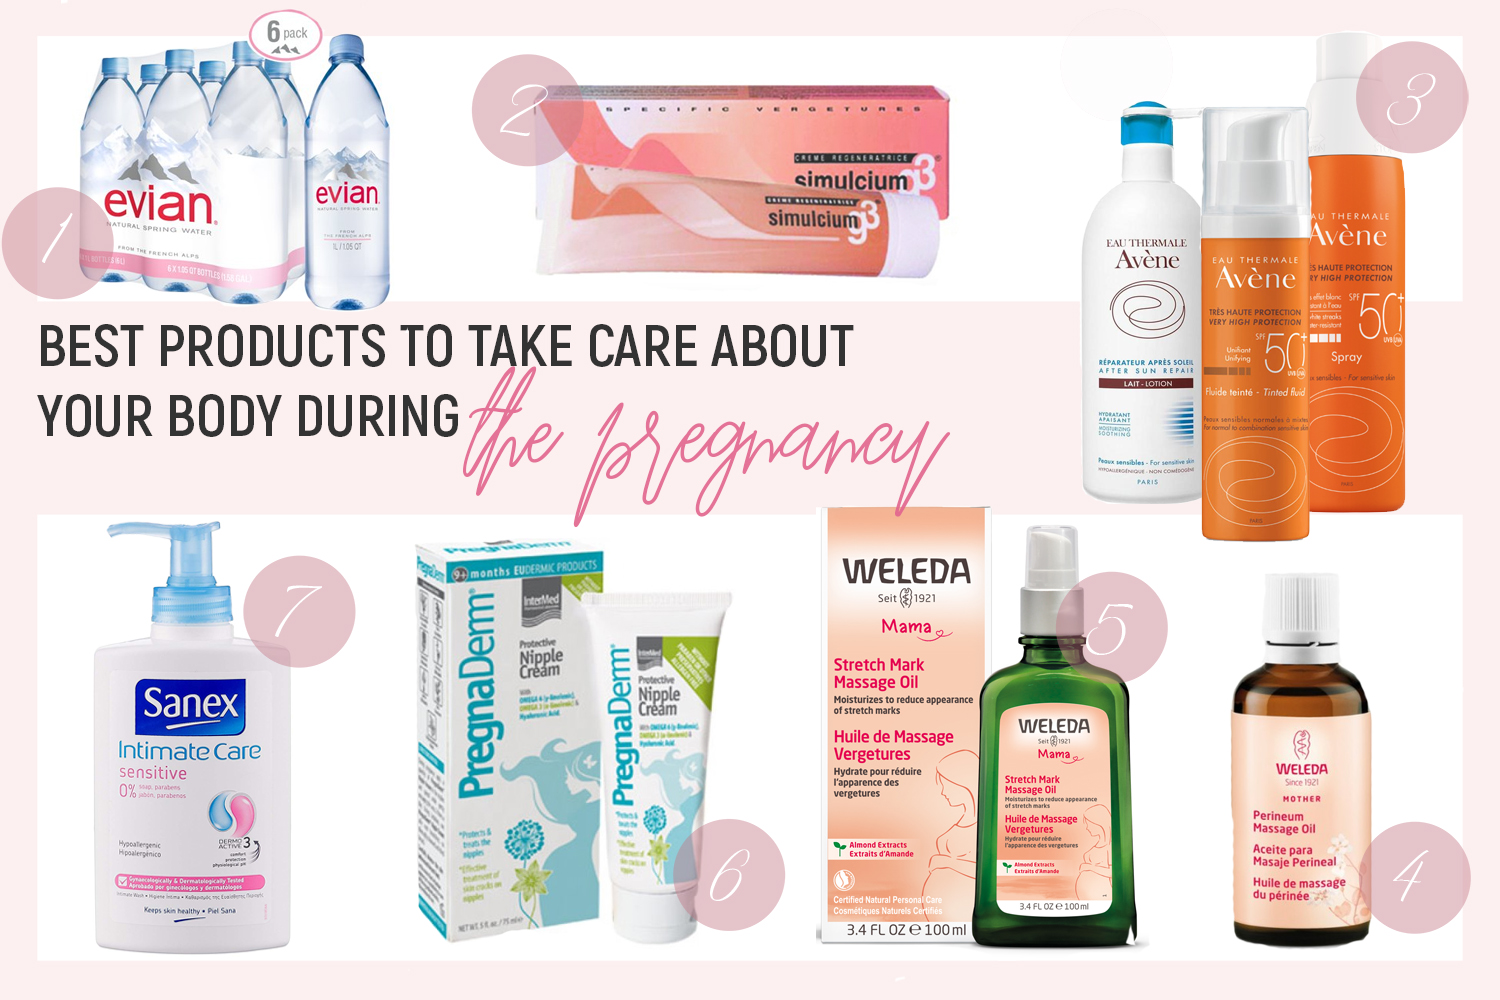 Best Products To Take Care About Your Body During The Pregnancy